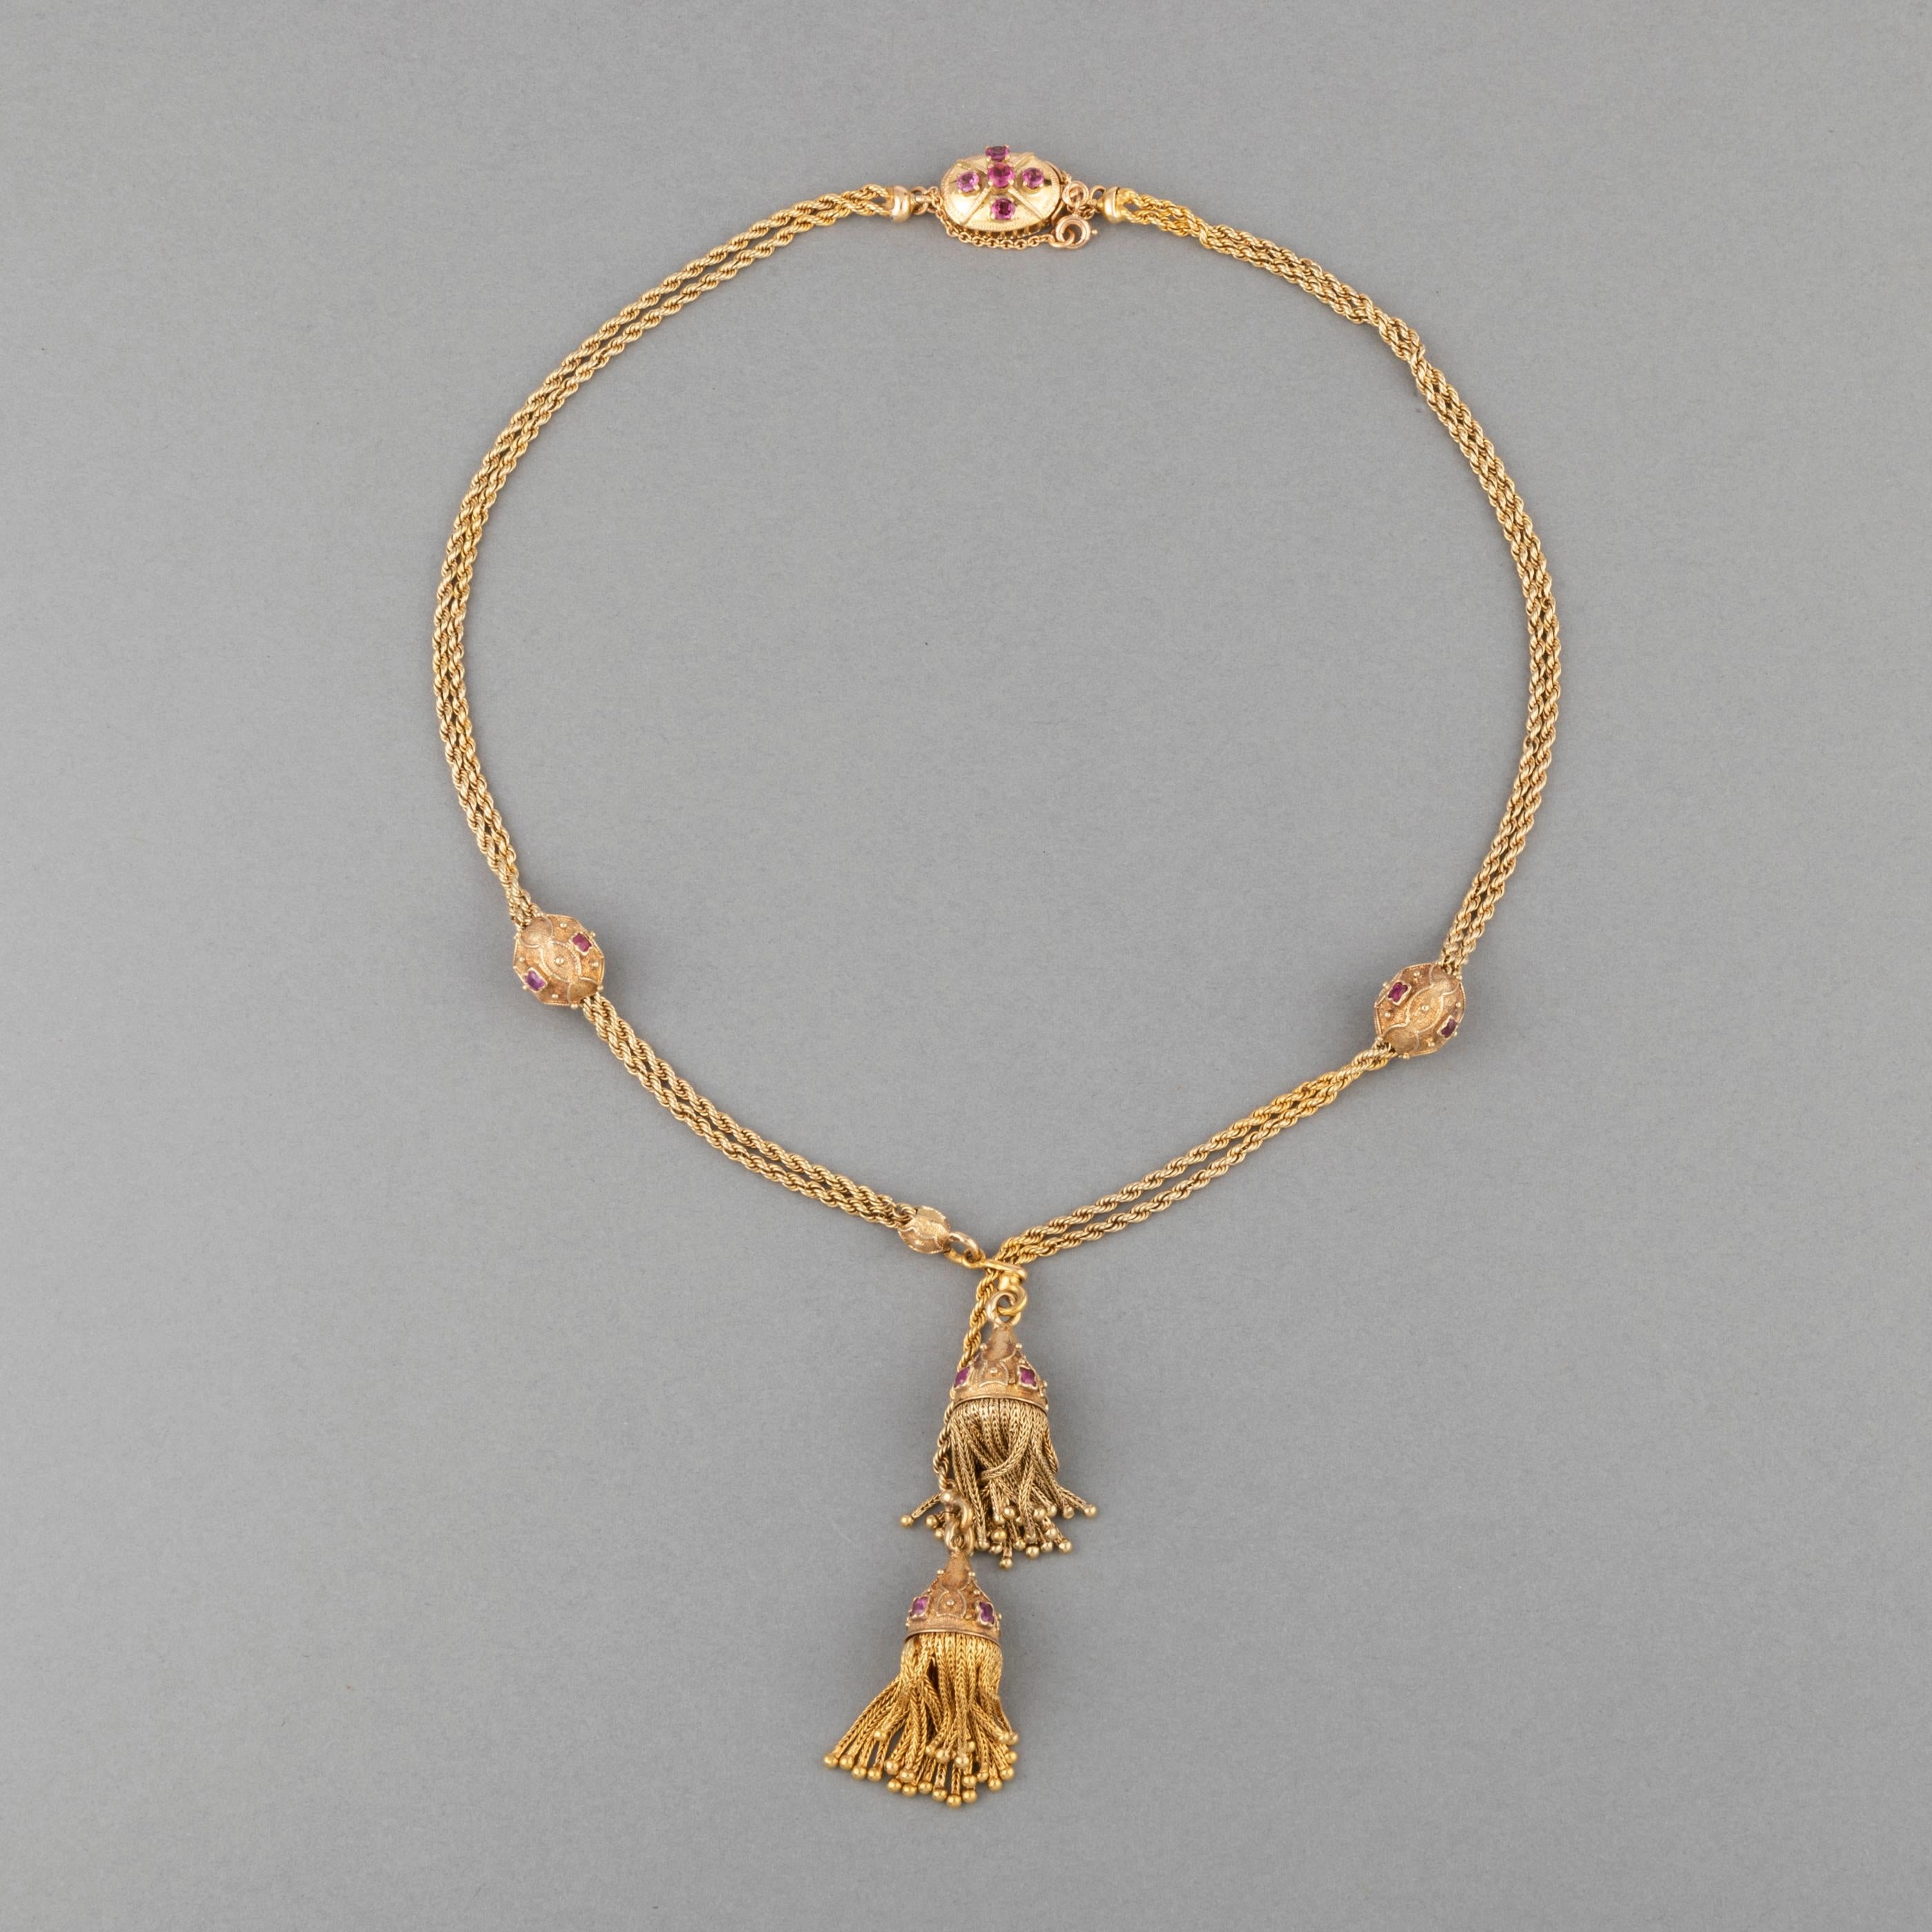 Antique Gold and Rubies French Pompon necklace

Very lovely antique necklace, french made circa 1880.
Made in yellow gold 18k and set with rubies. The craft is quality. The ripe and pompon design is elegant.
The length is 41 cm or 16.4 inches.
Total